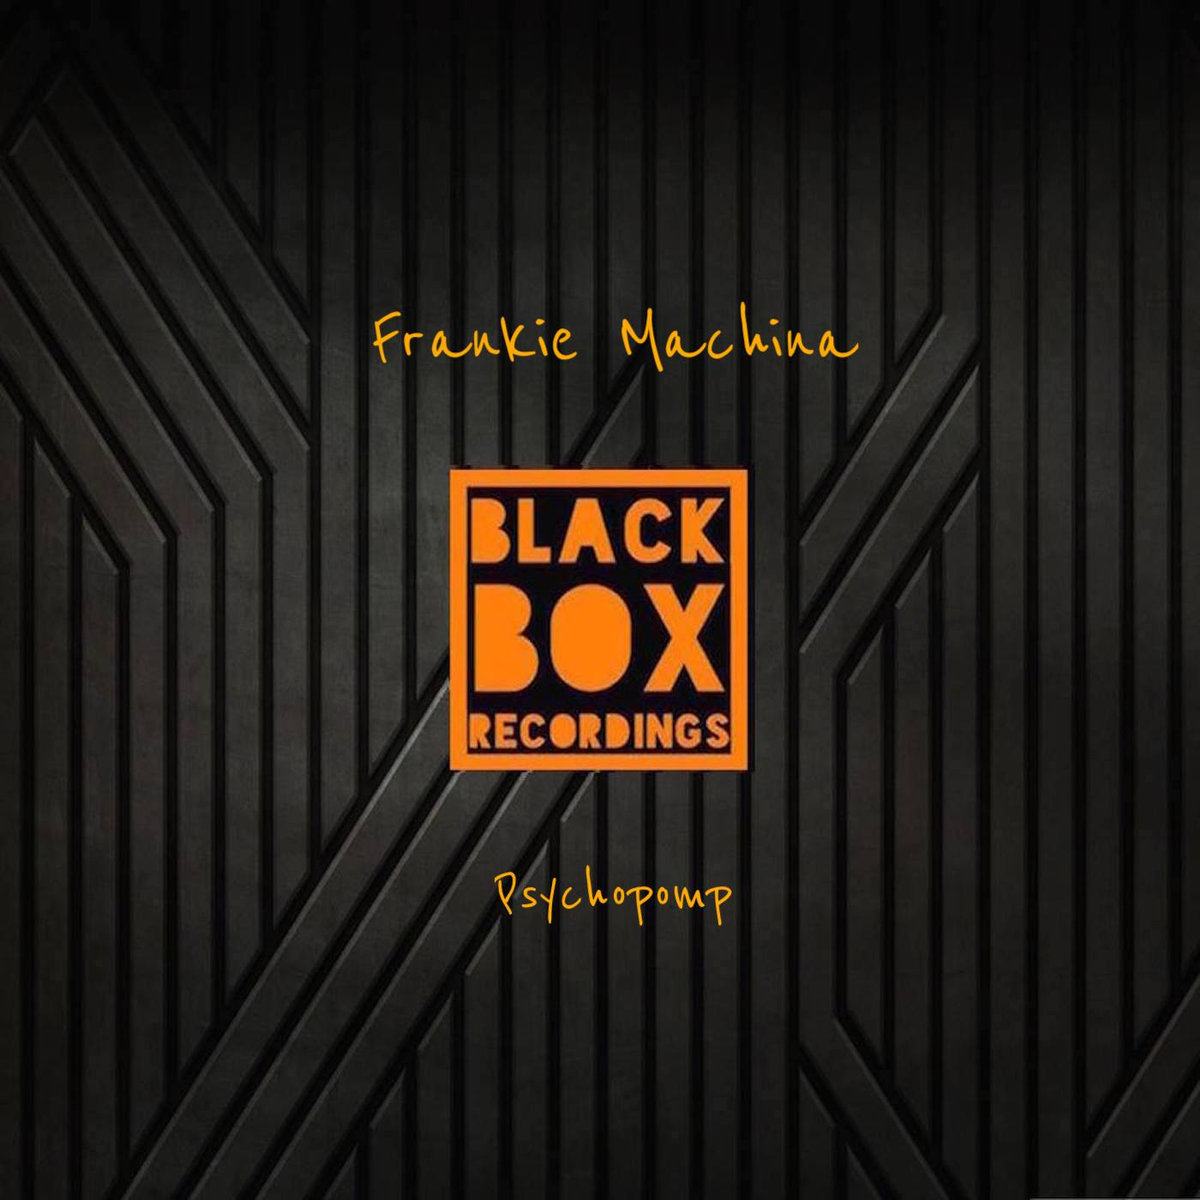 Forthcoming collection from Frankie Machina on Black Box Recordings, featuring a RoW remix